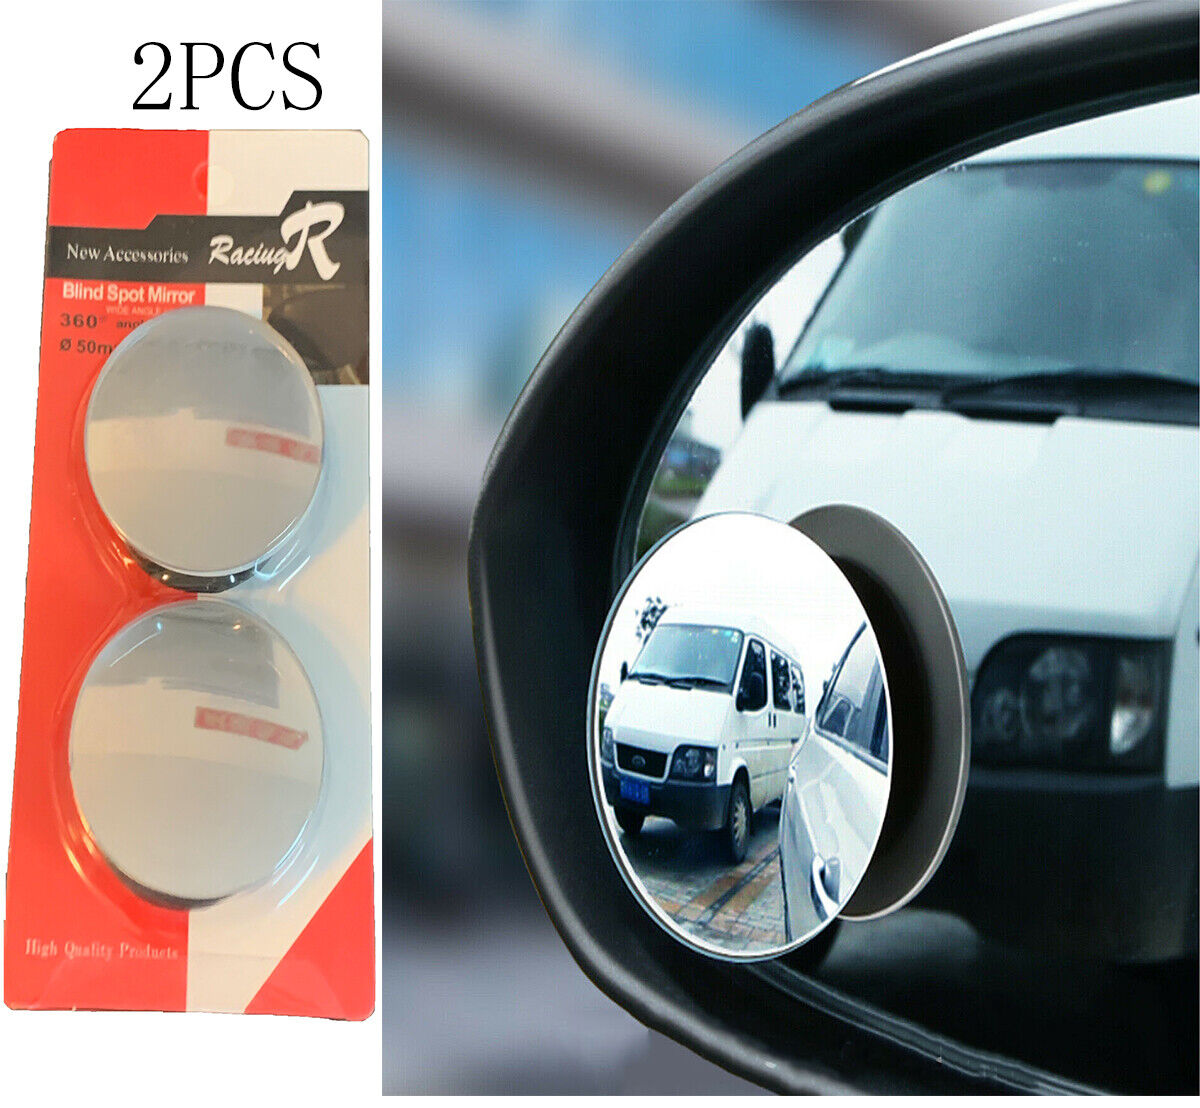 2PCS Blind Spot Mirrors Round HD Glass Convex 360° Side Rear View Mirror for Car